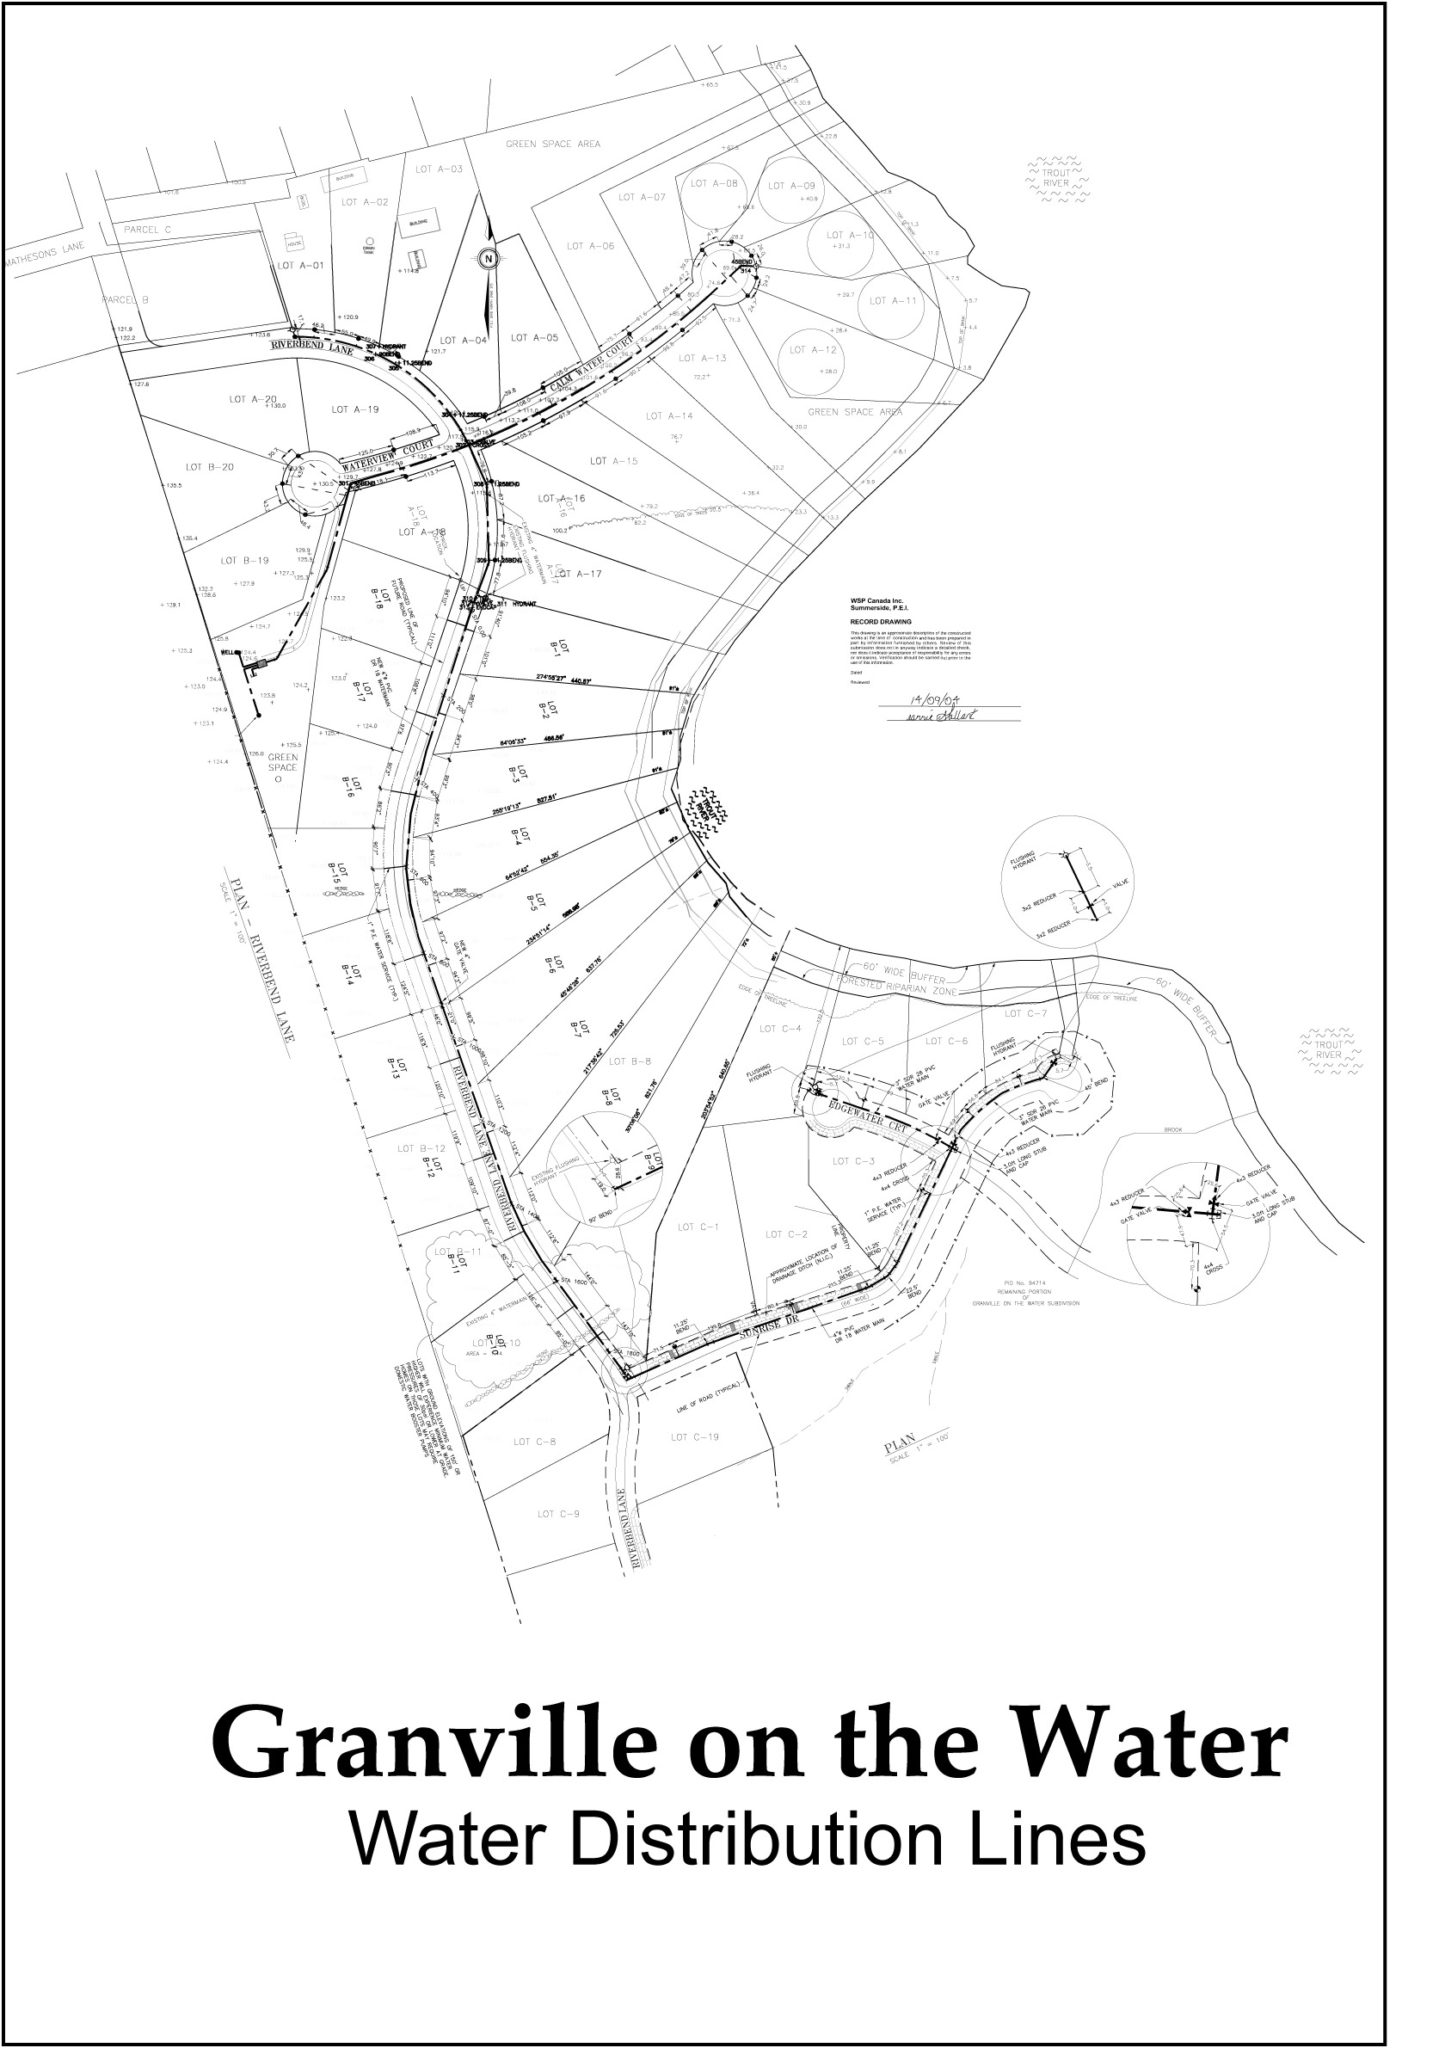 Granville Water System Overview